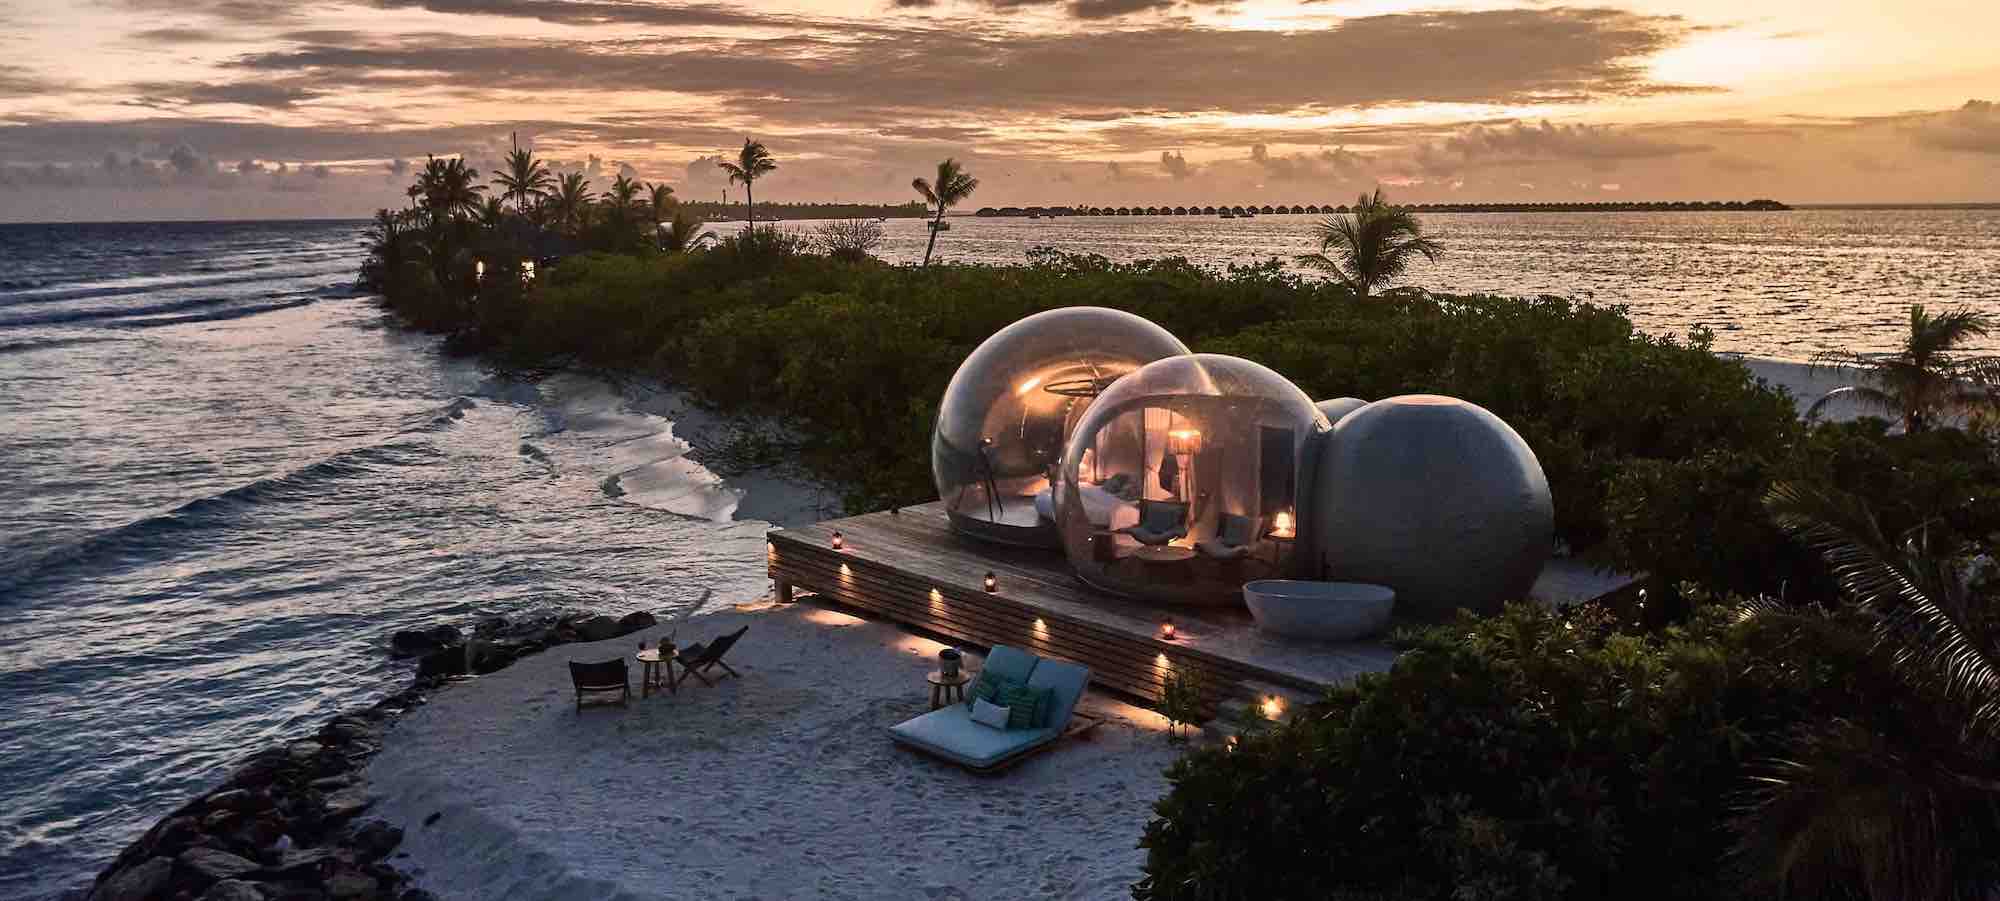 A bubble hotel on a wooden platform, next to a small wooden beach surrounded by vegetation and with a couple of loungers to contemplate the sea